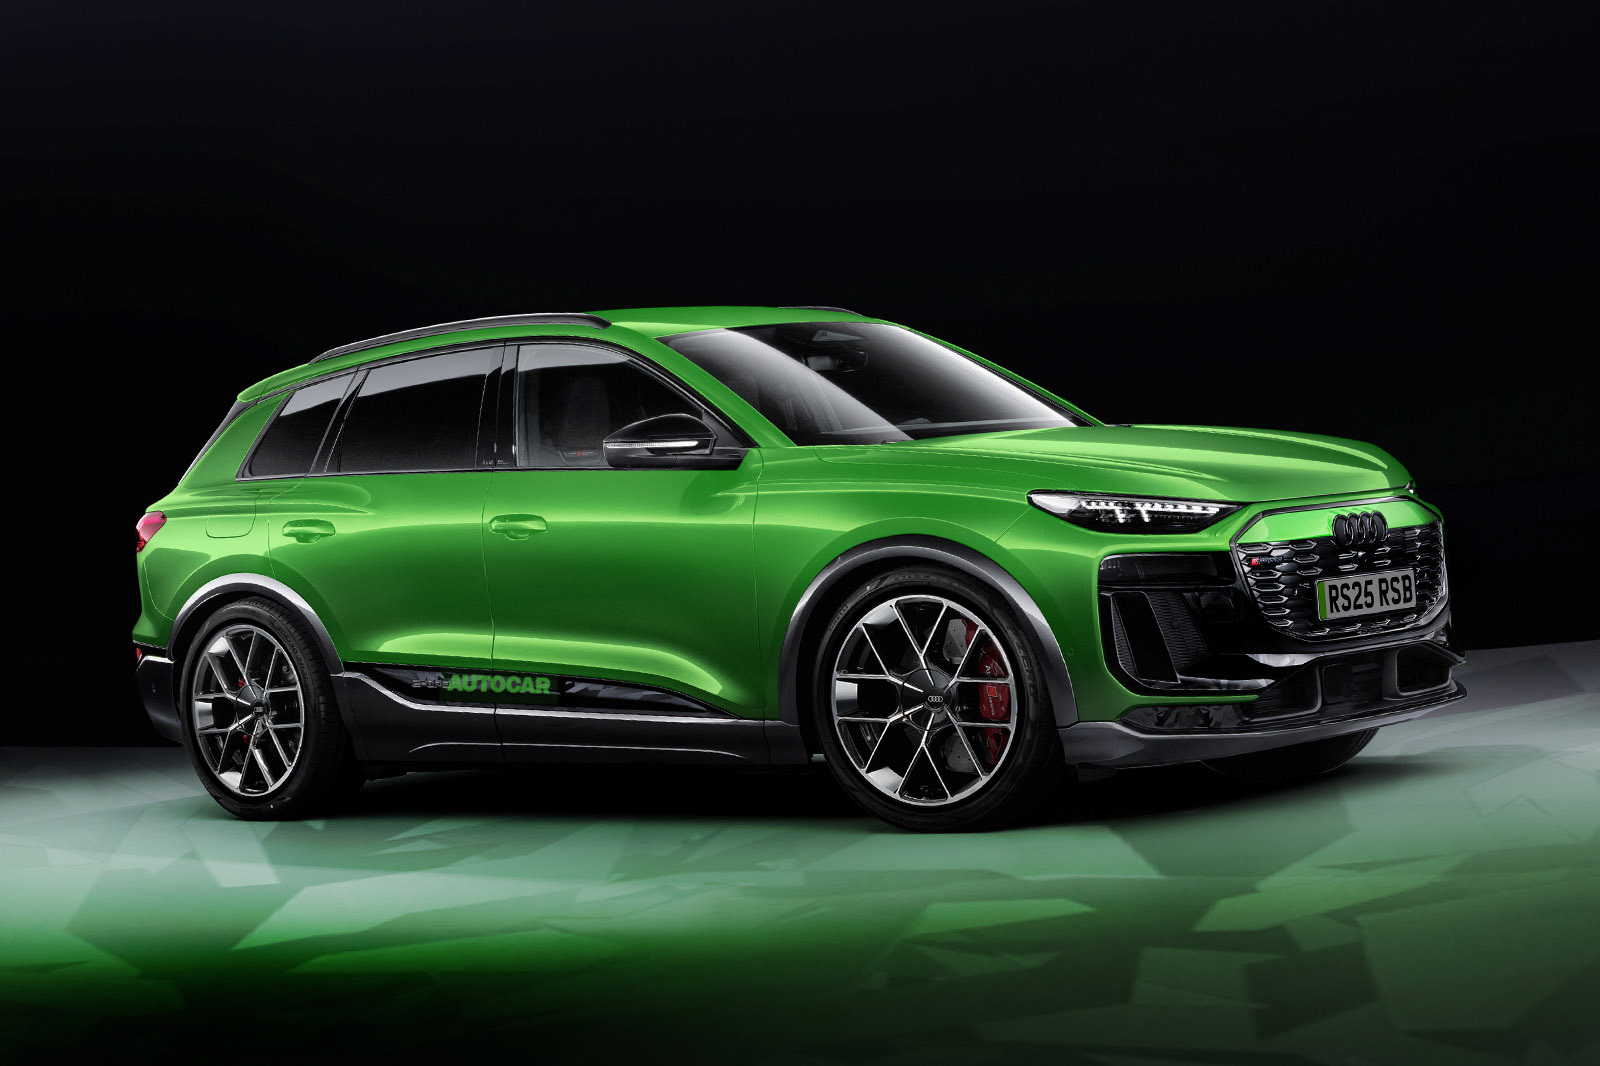 Hot Audi RS Q6 E-tron due in 2025 with more than 600bhp